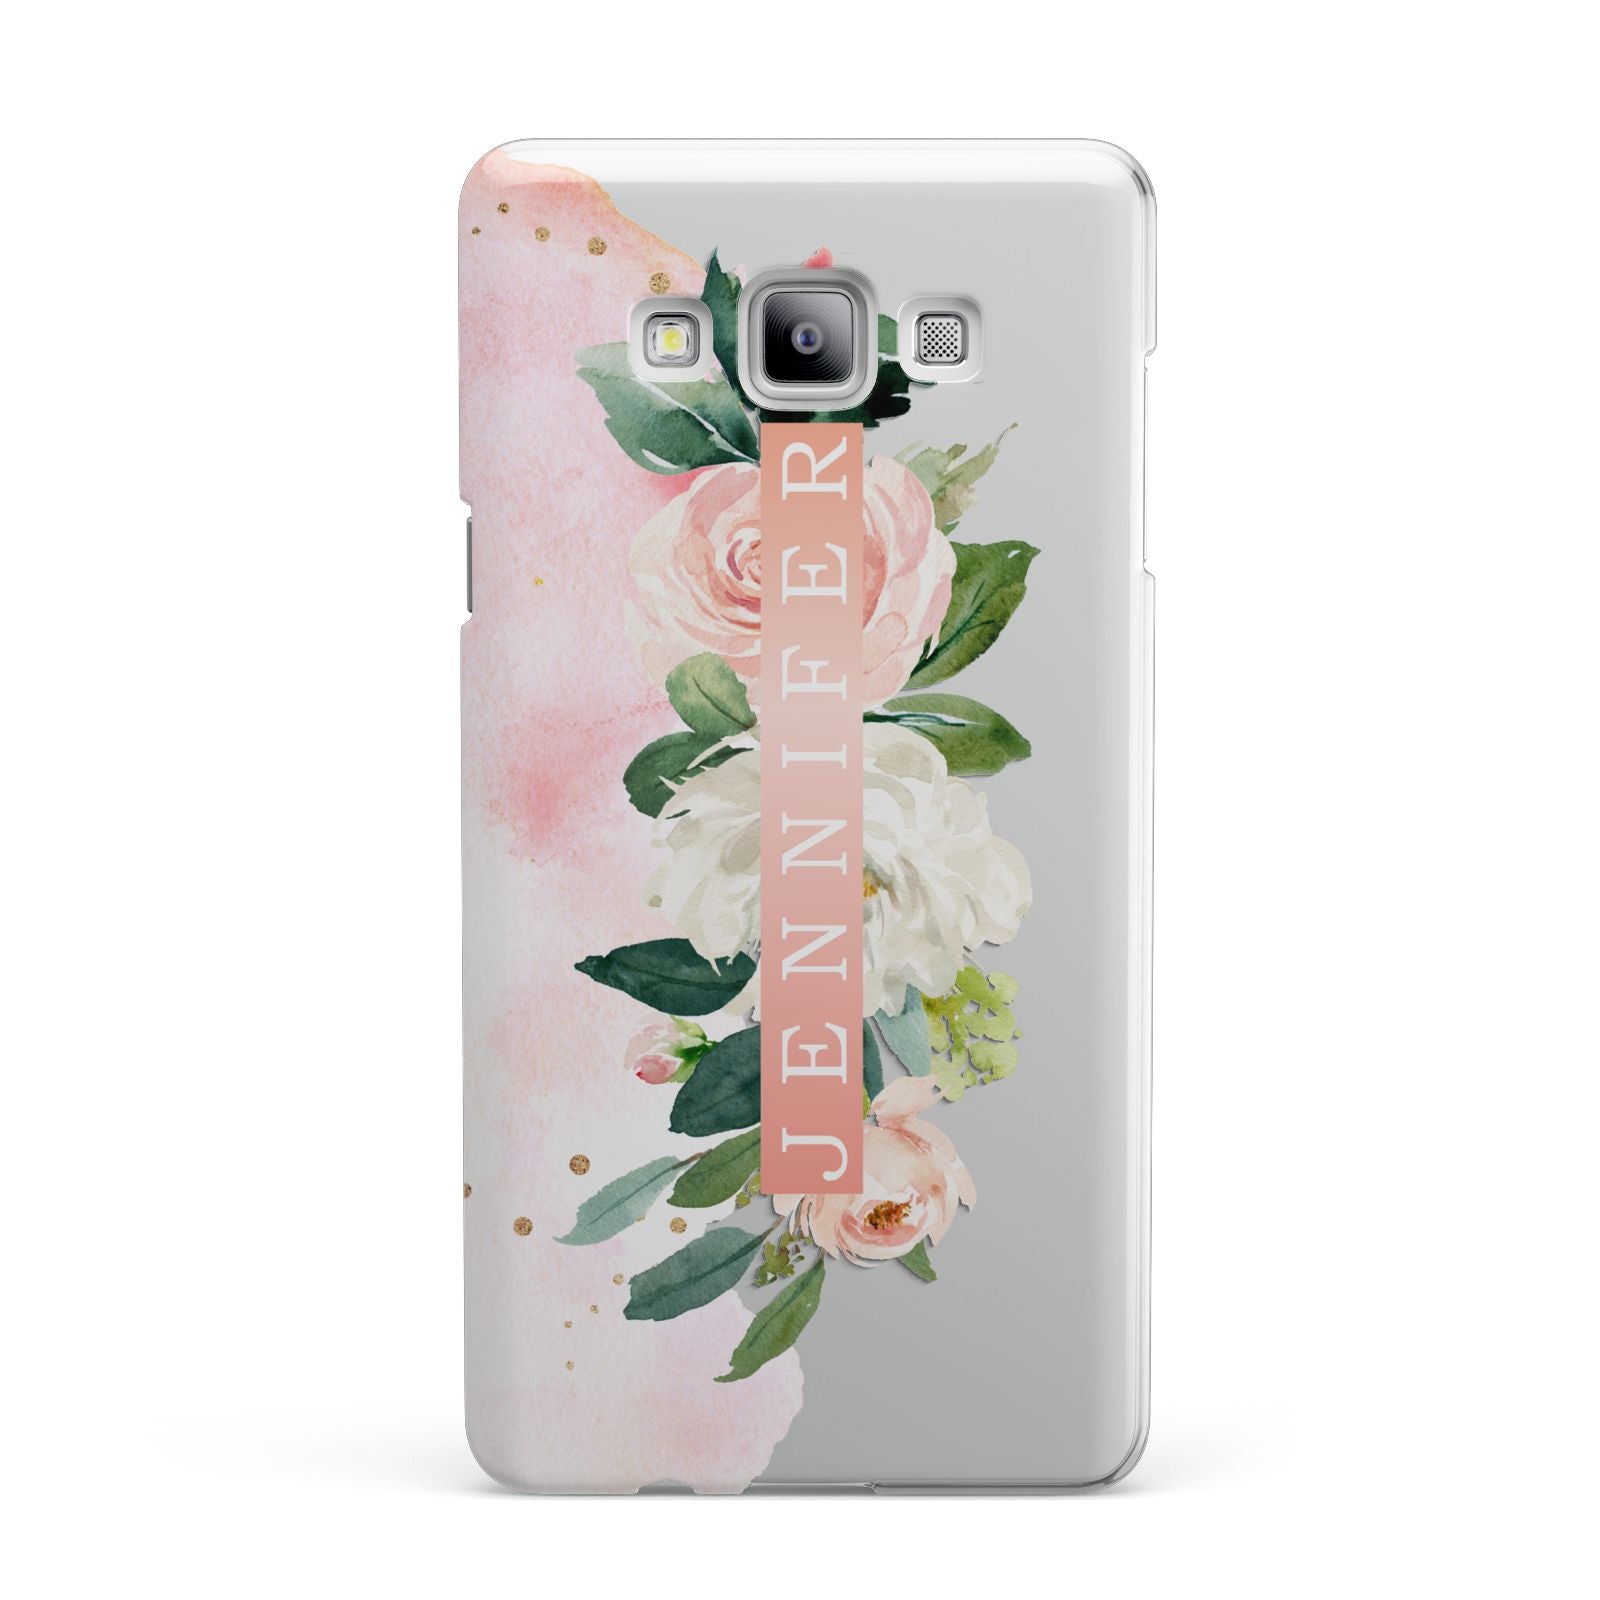 Blush Pink Personalised Name Floral Samsung Galaxy A7 2015 Case